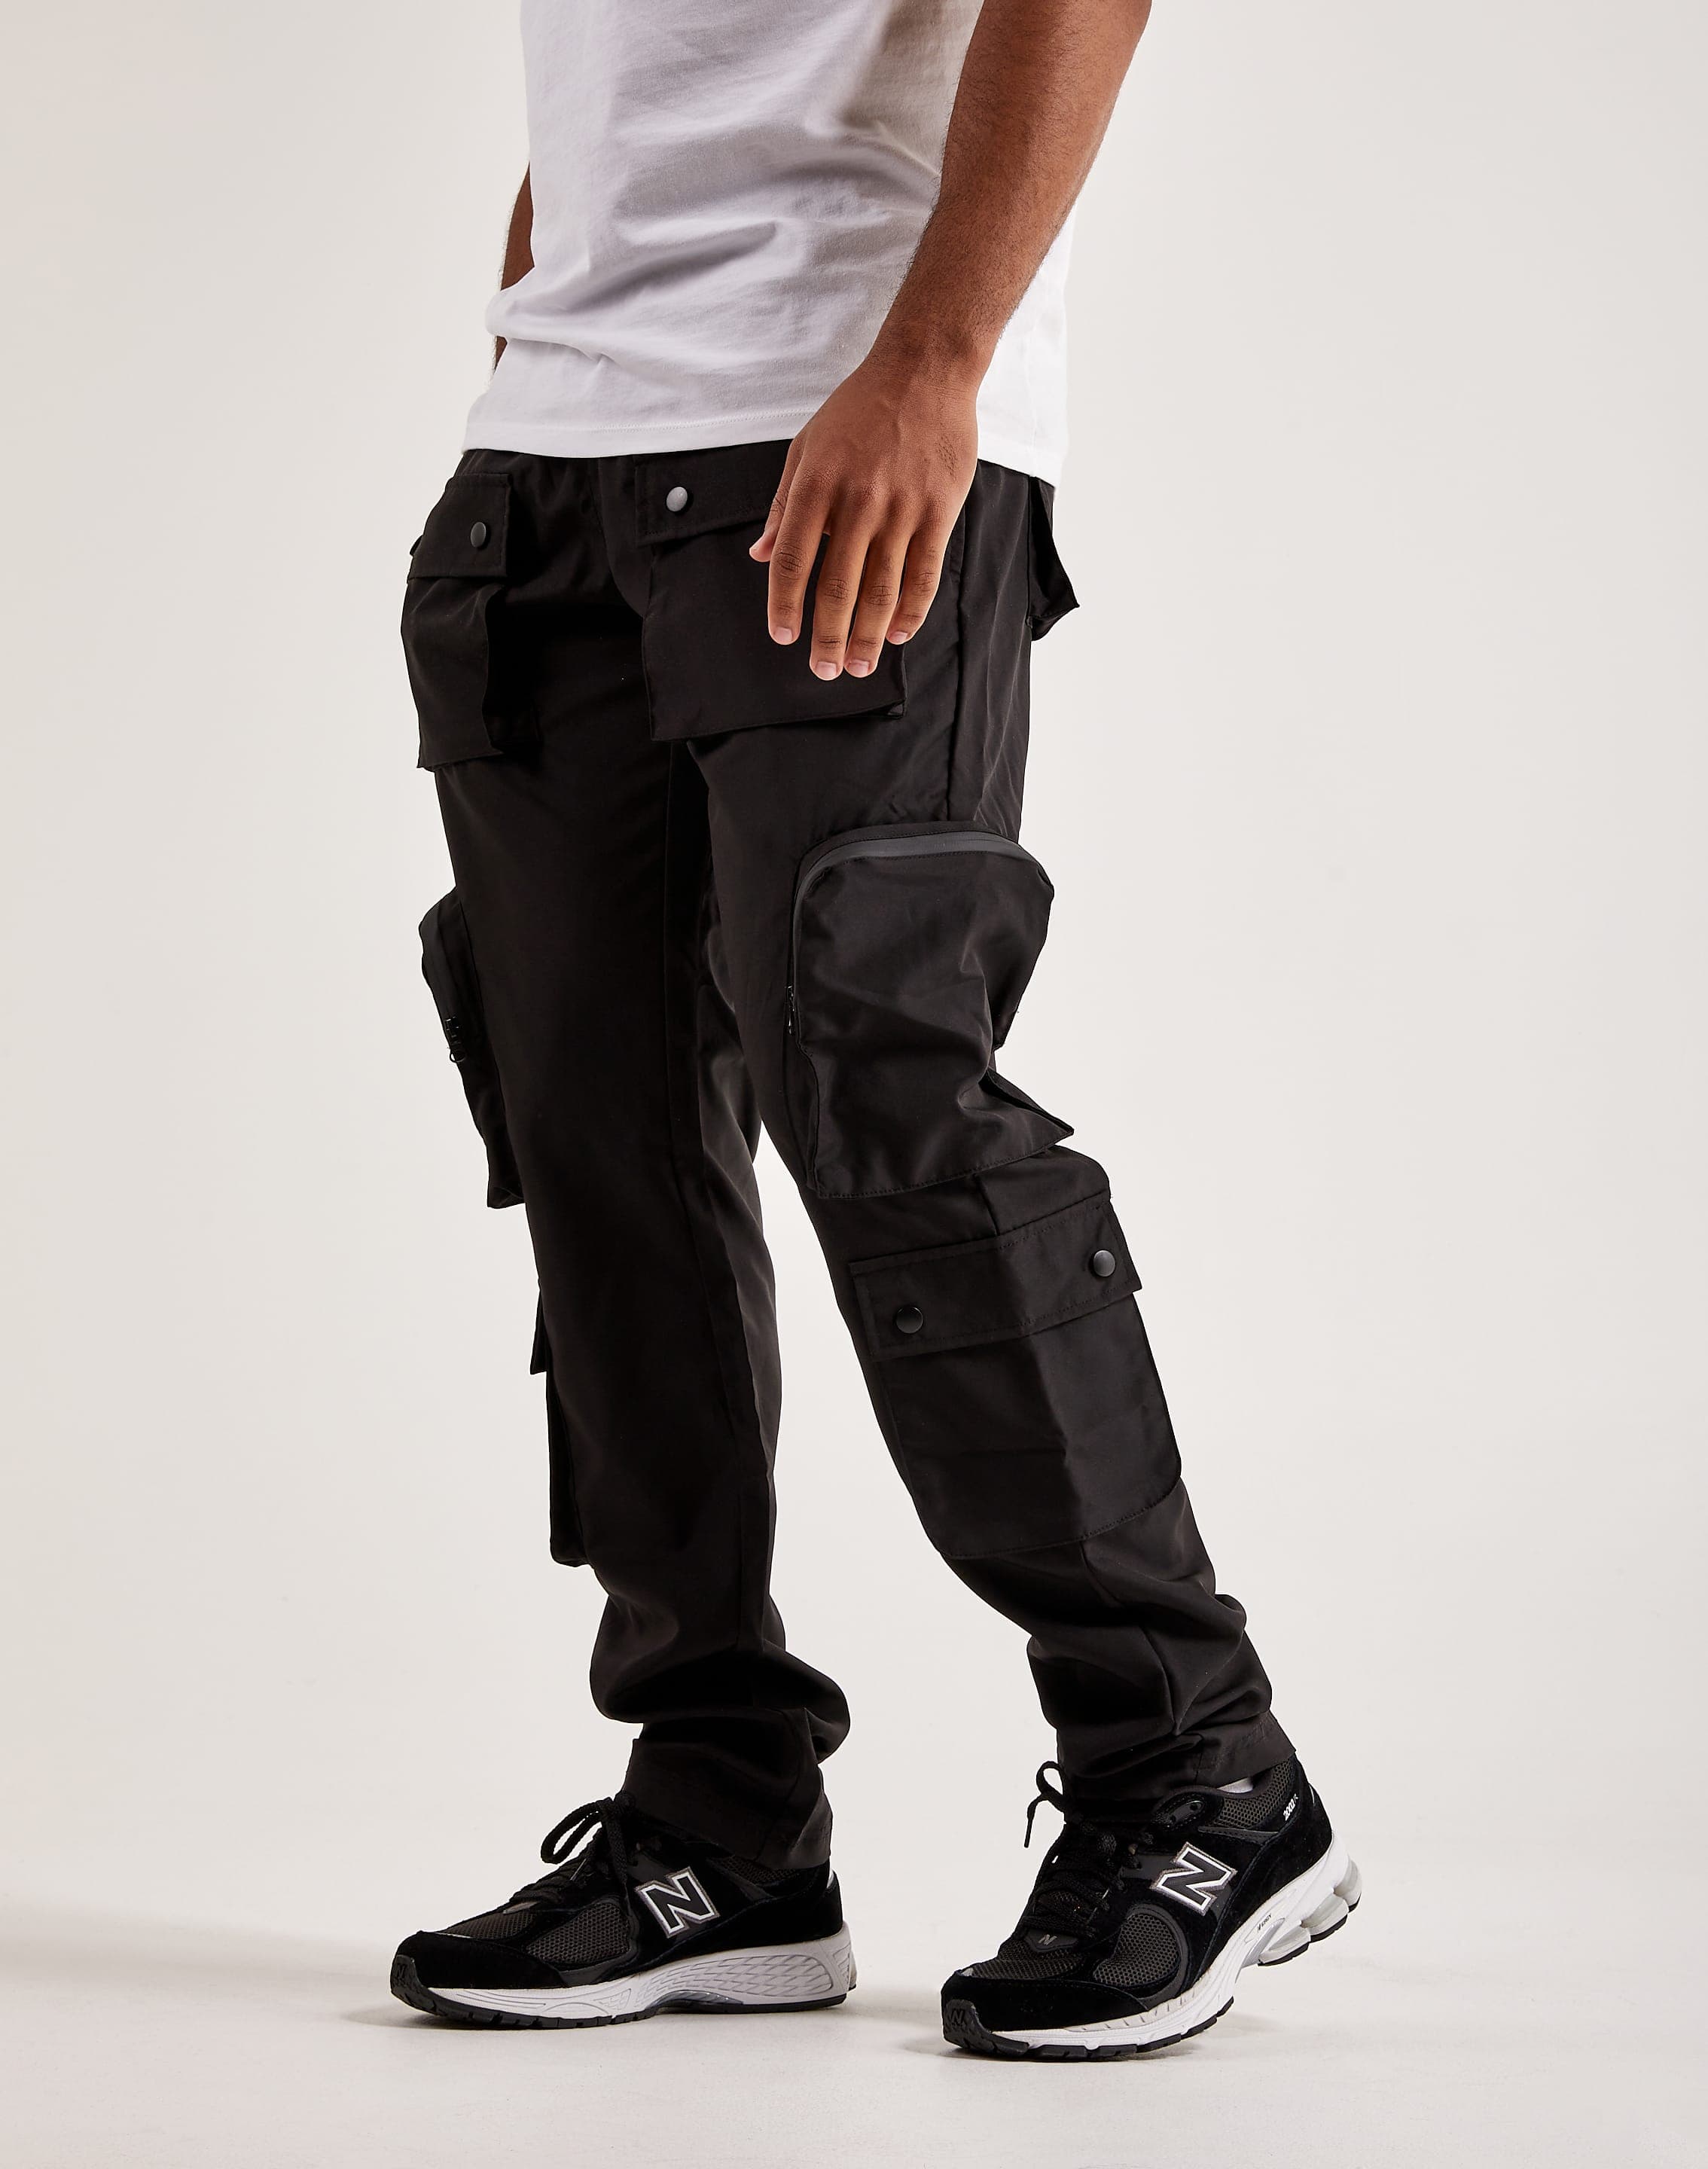 EPTM Dave East Cargo Pants